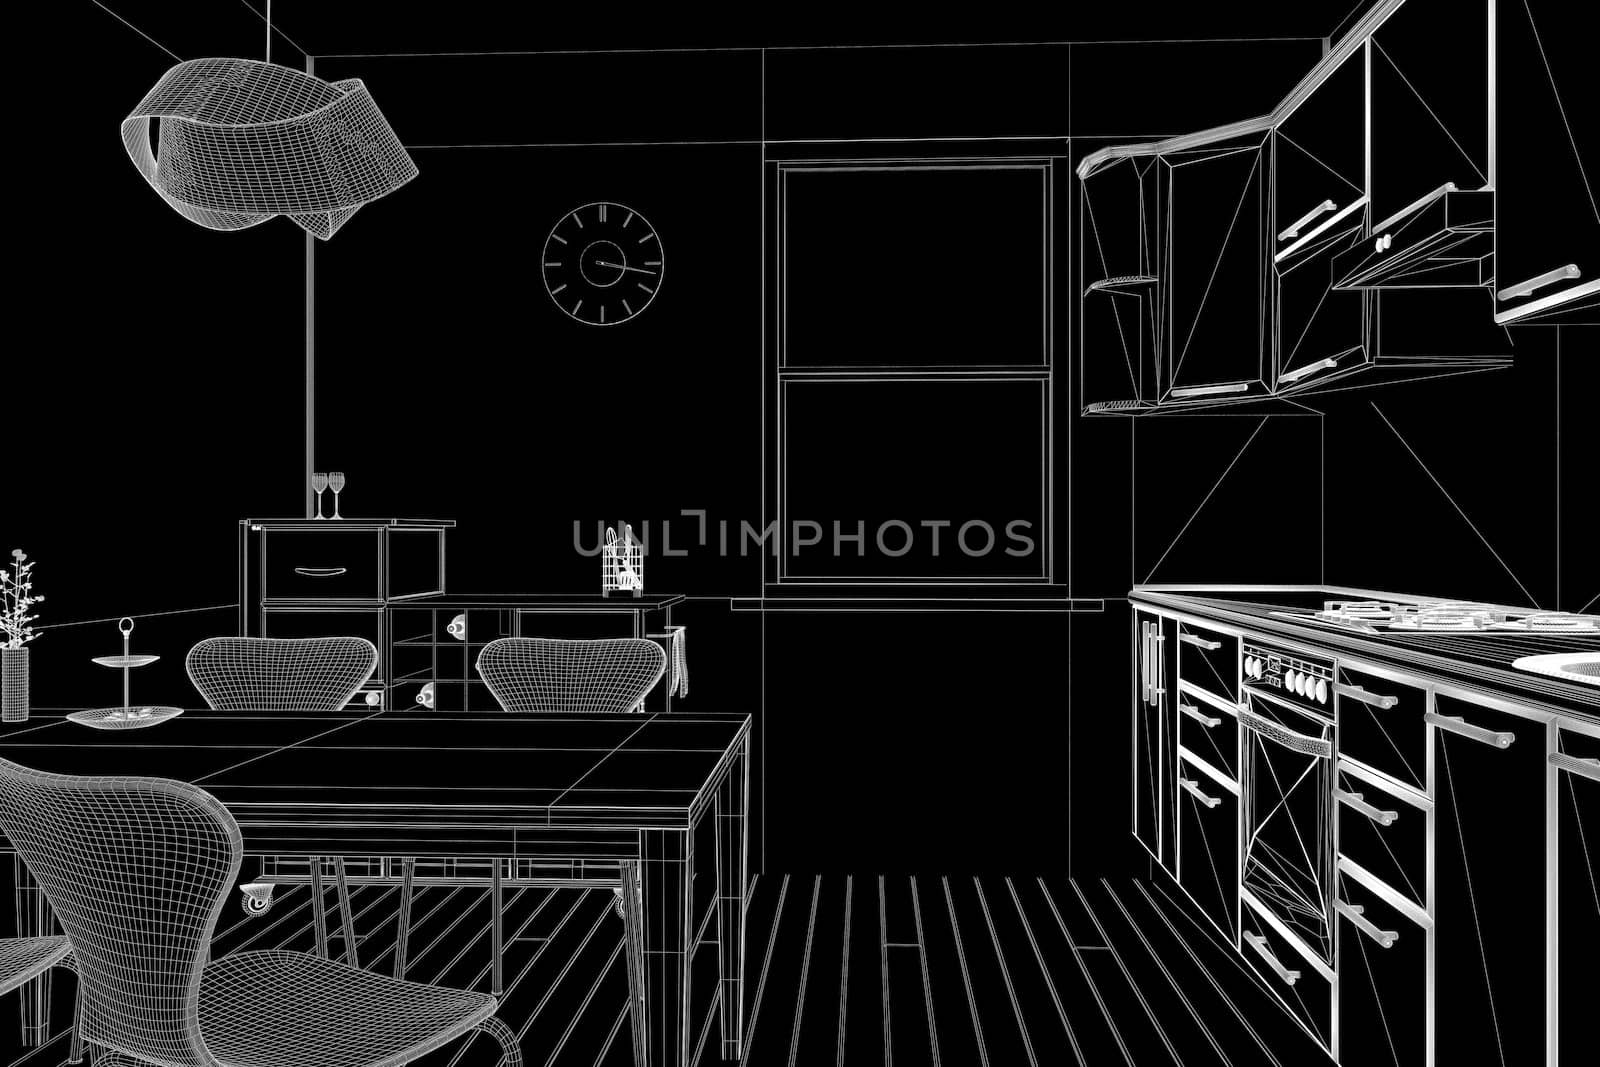 3D render of a kitchen in wireframe view by enrico.lapponi